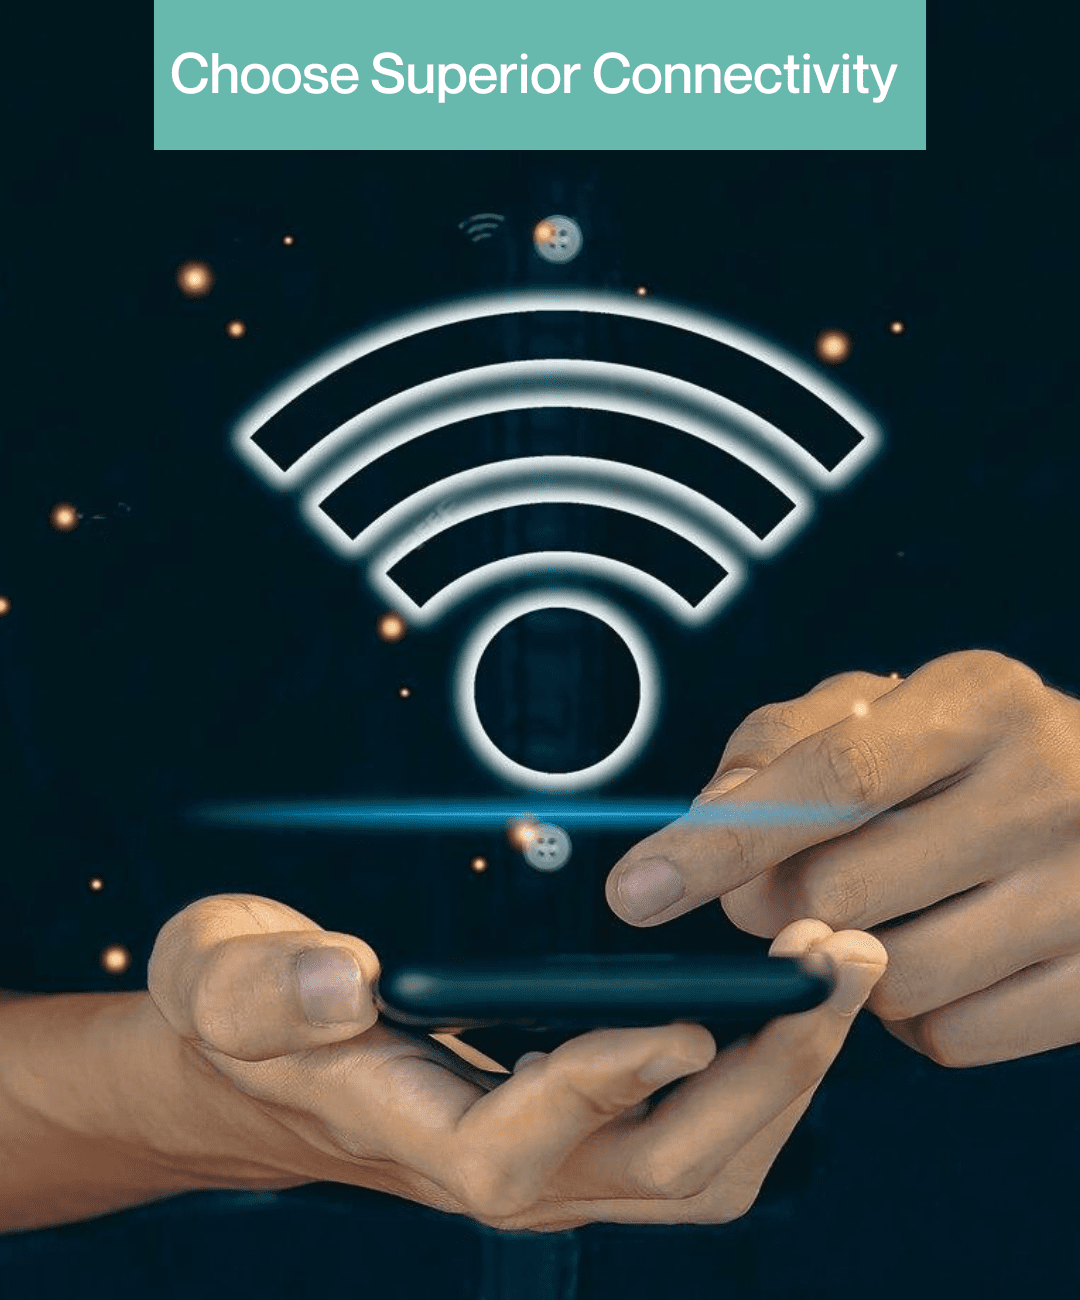 Hands holding a smartphone with a WiFi symbol hologram, indicating high-quality wireless connectivity available through BDR's services.